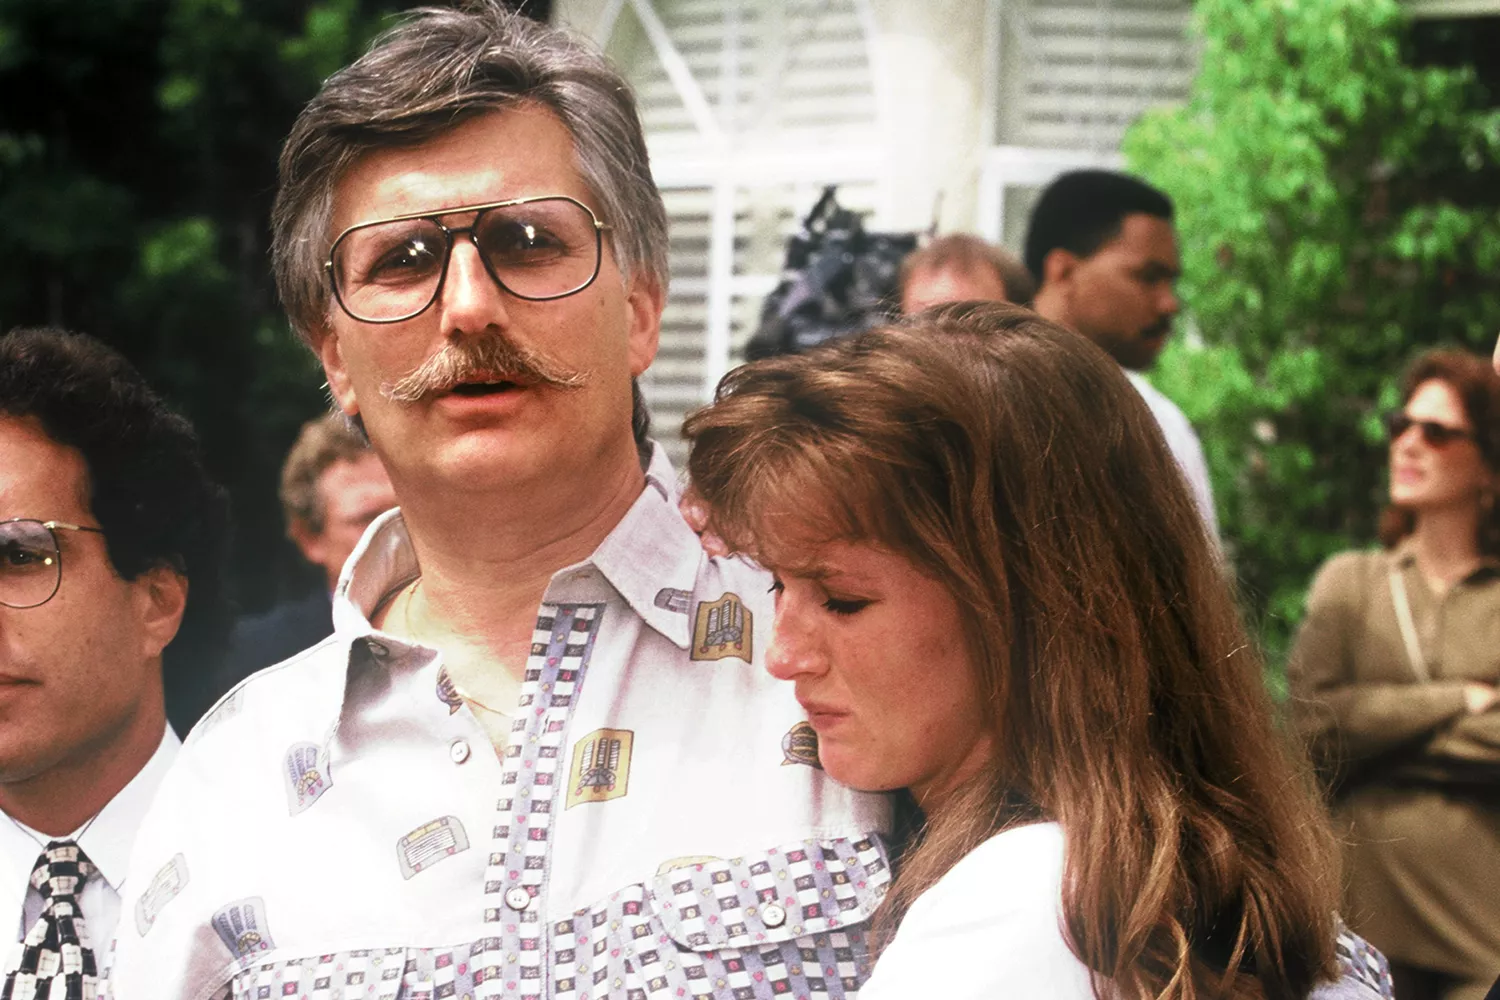 Fred and Kim Goldman, father and sister of Ronald Goldman, appear in front of the media June 15, 1994 at their home in Agoura Hills, CA, following the murder of Ronald and O.J. Simpson's ex-wife Nicole Brown Simpson.